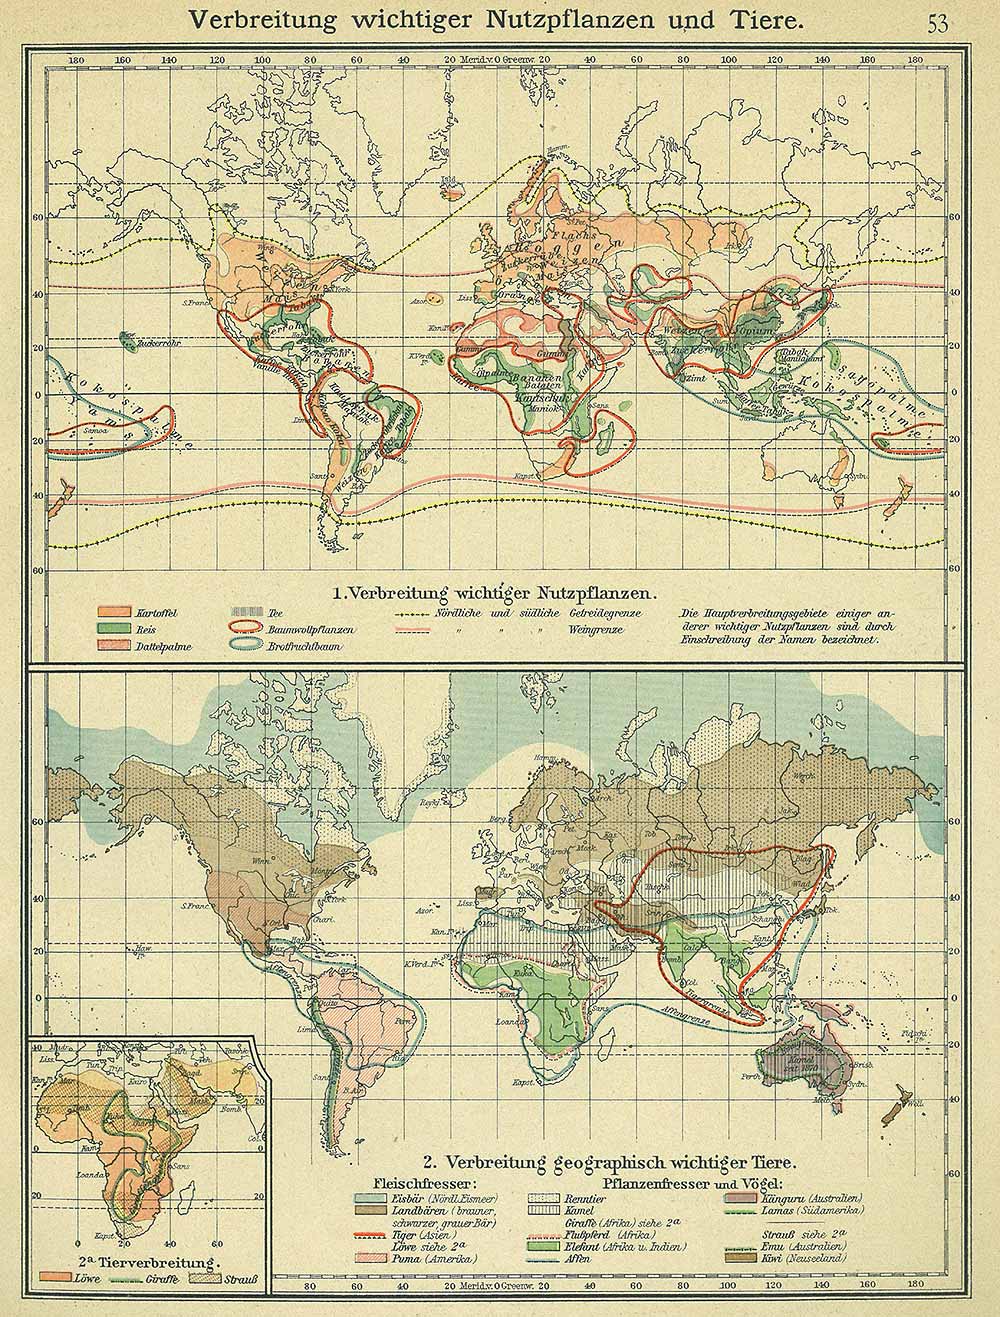 Important world crops and animals, Andrees 'Berliner Schul-Atlas', 1916, page 53, published size to print borders 18.9 cm wide by 25.71 cm high.